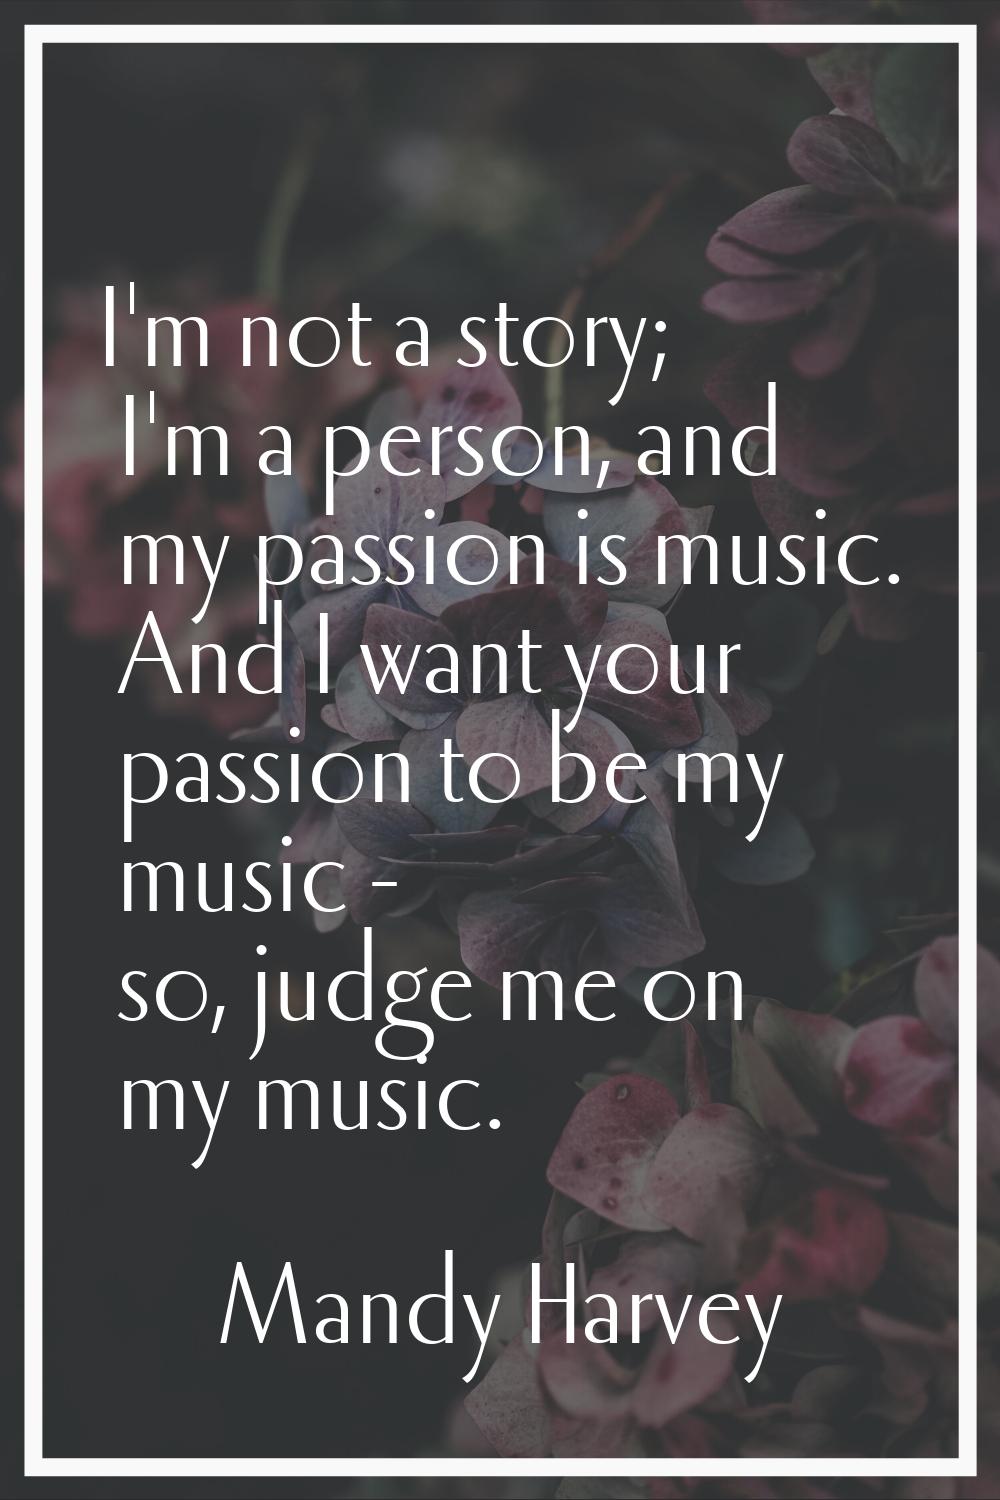 I'm not a story; I'm a person, and my passion is music. And I want your passion to be my music - so